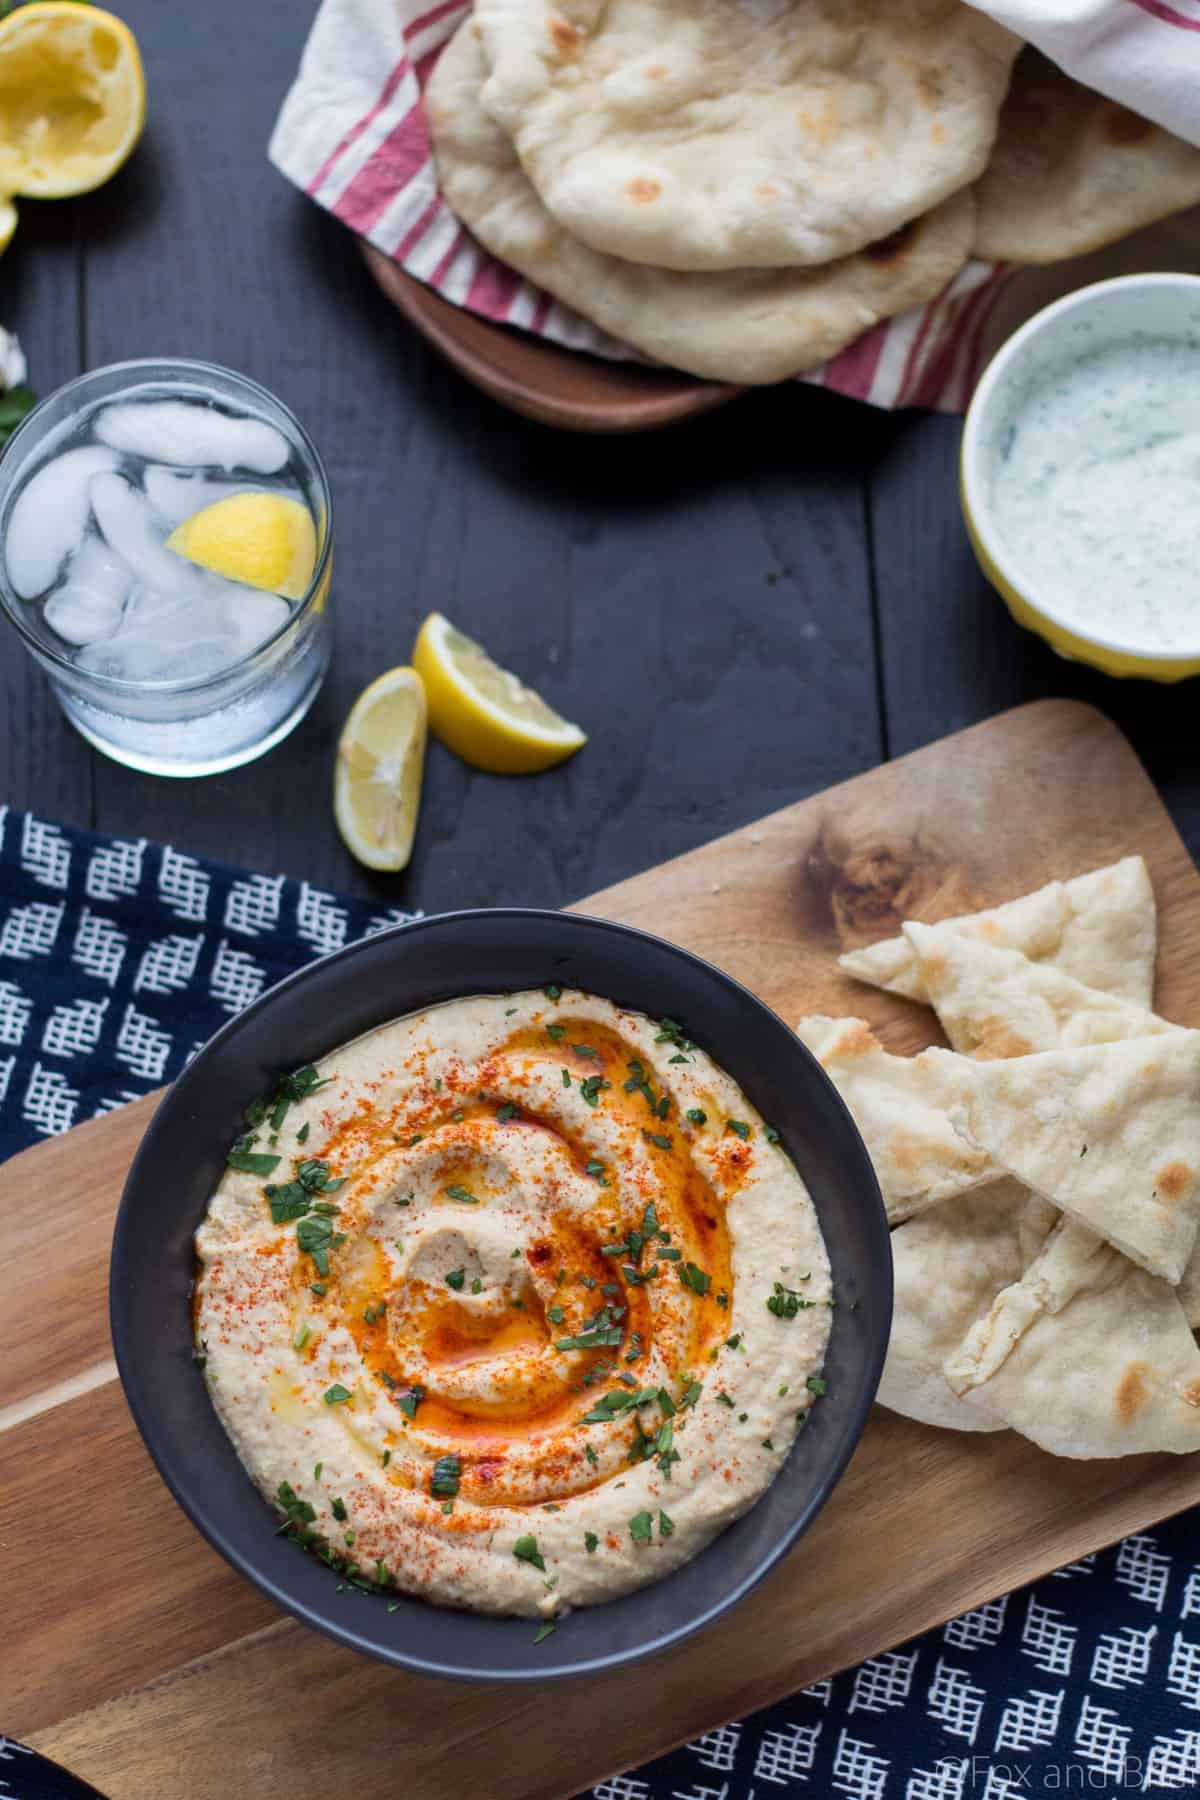 This easy homemade hummus can be made in about 5 minutes and tastes amazing!